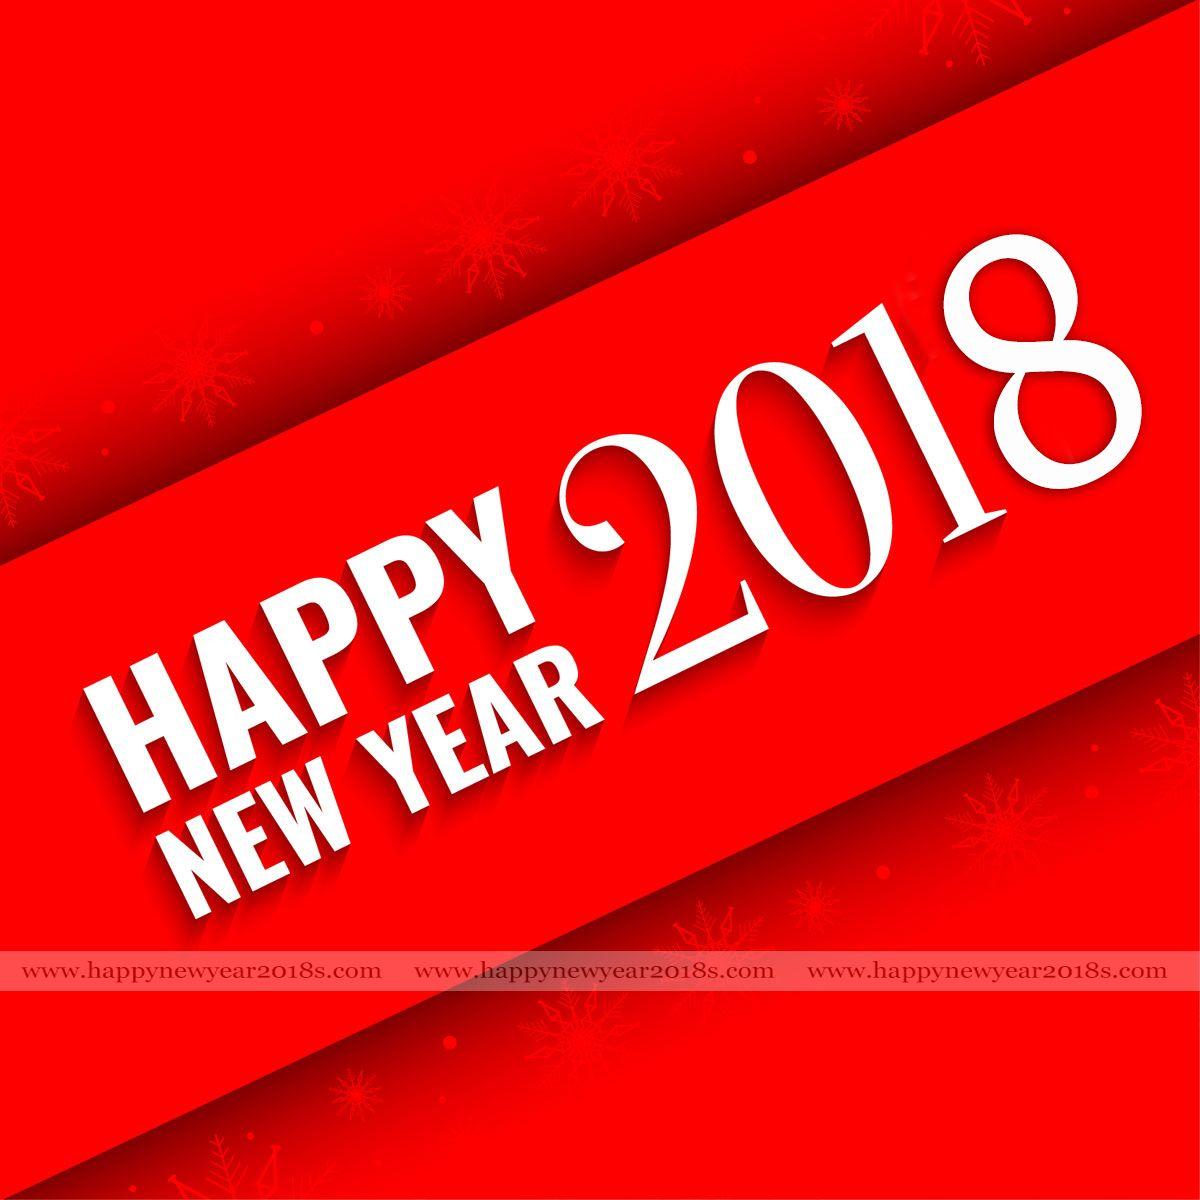 Happy New Year 2018 Background HD Wallpaper, Image, Picture